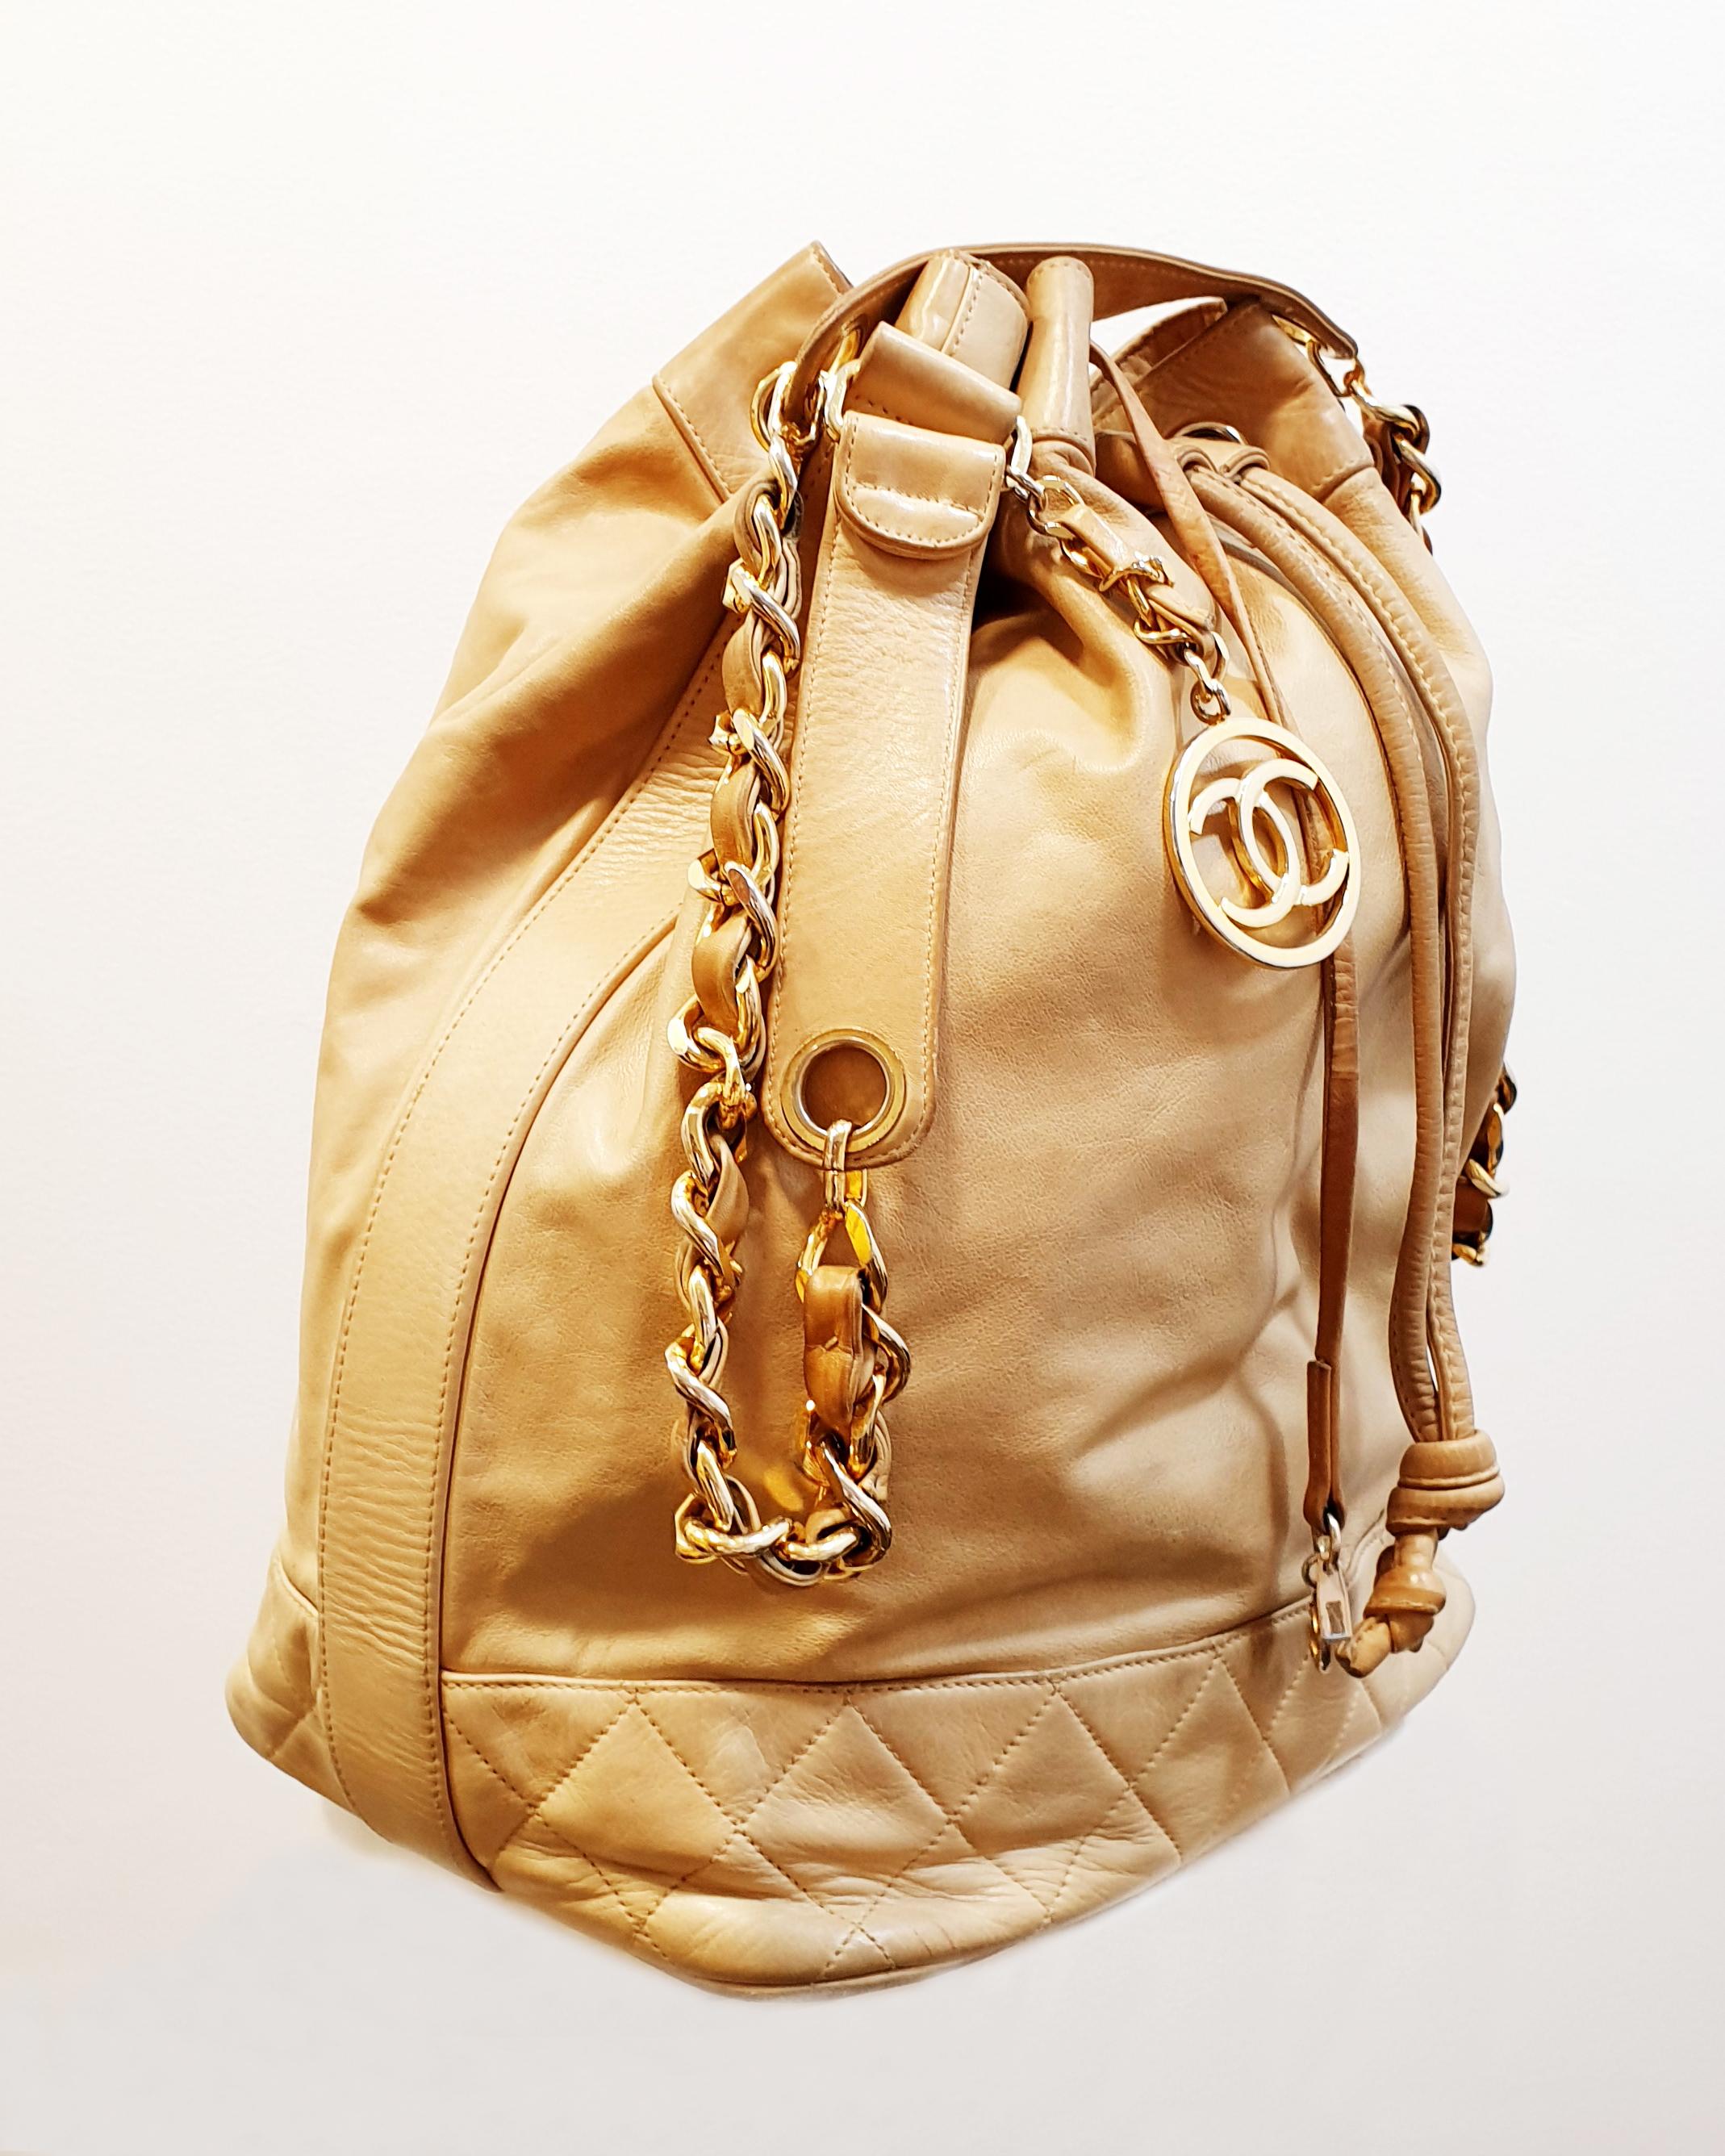 Vintage Beige Caramel Chanel Large drawstring bag lambskin with gold metal 
Lambskin & Gold-Tone Metal
Height * Lenght  35 x 33cm /14 x 15 inches 
Shoulder Belt 105cm / 41,33 inches

Absence of vulgarity was central to Chanel’s definition of luxury,